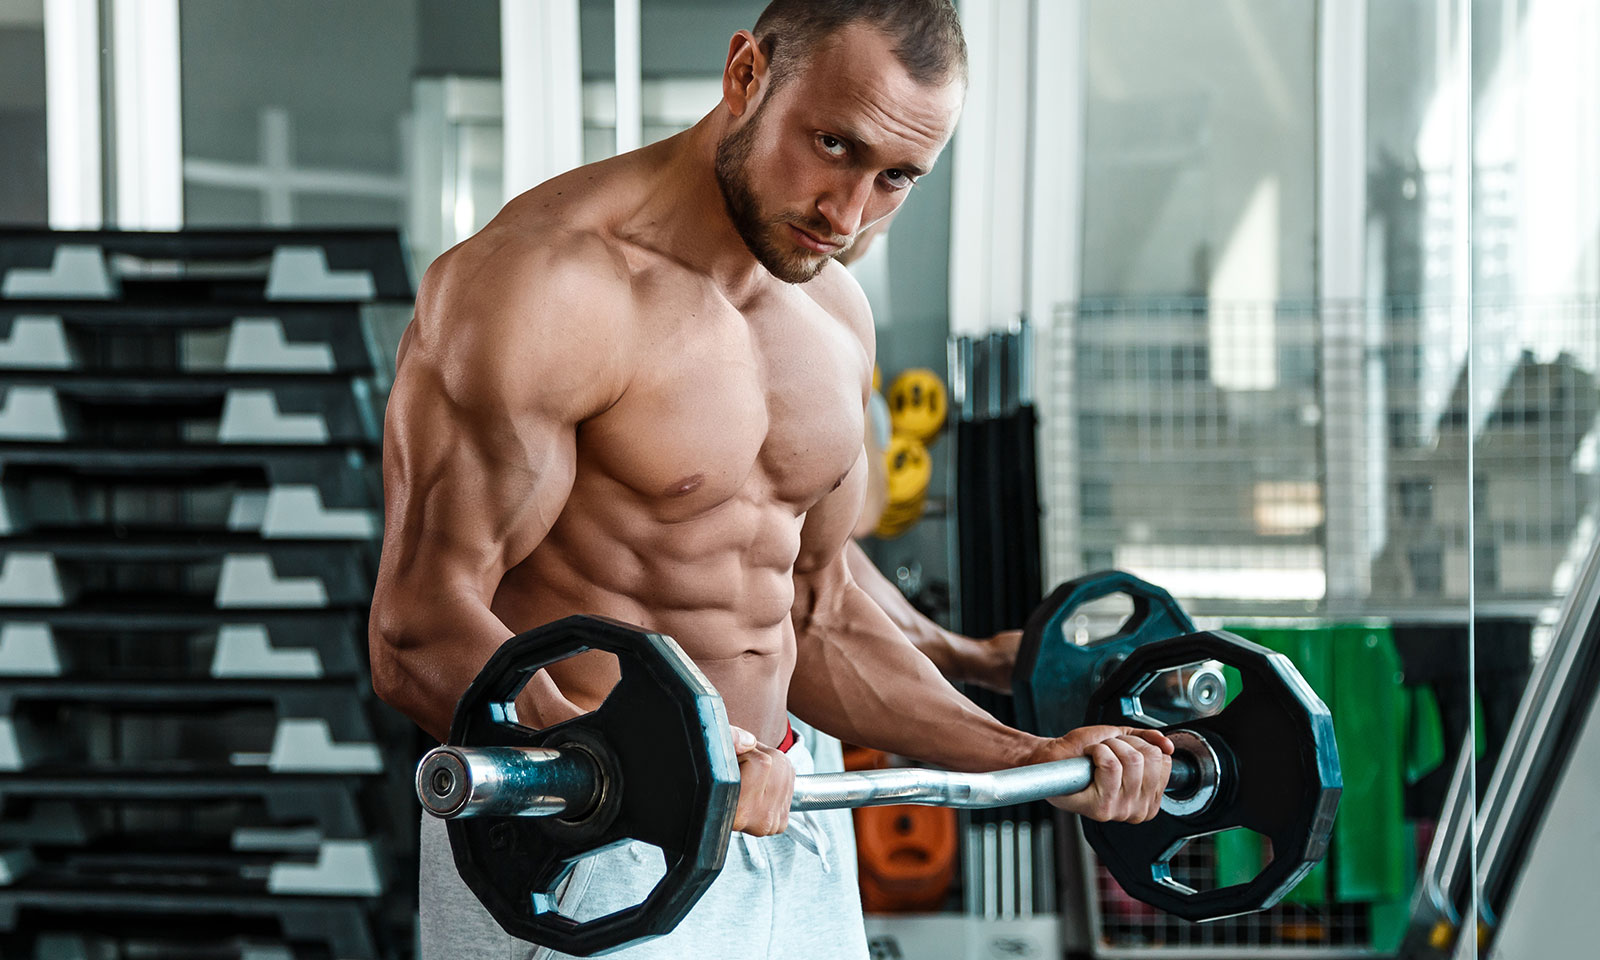 Four Of The Best Mass Gaining Hacks You Could Ever Wish For